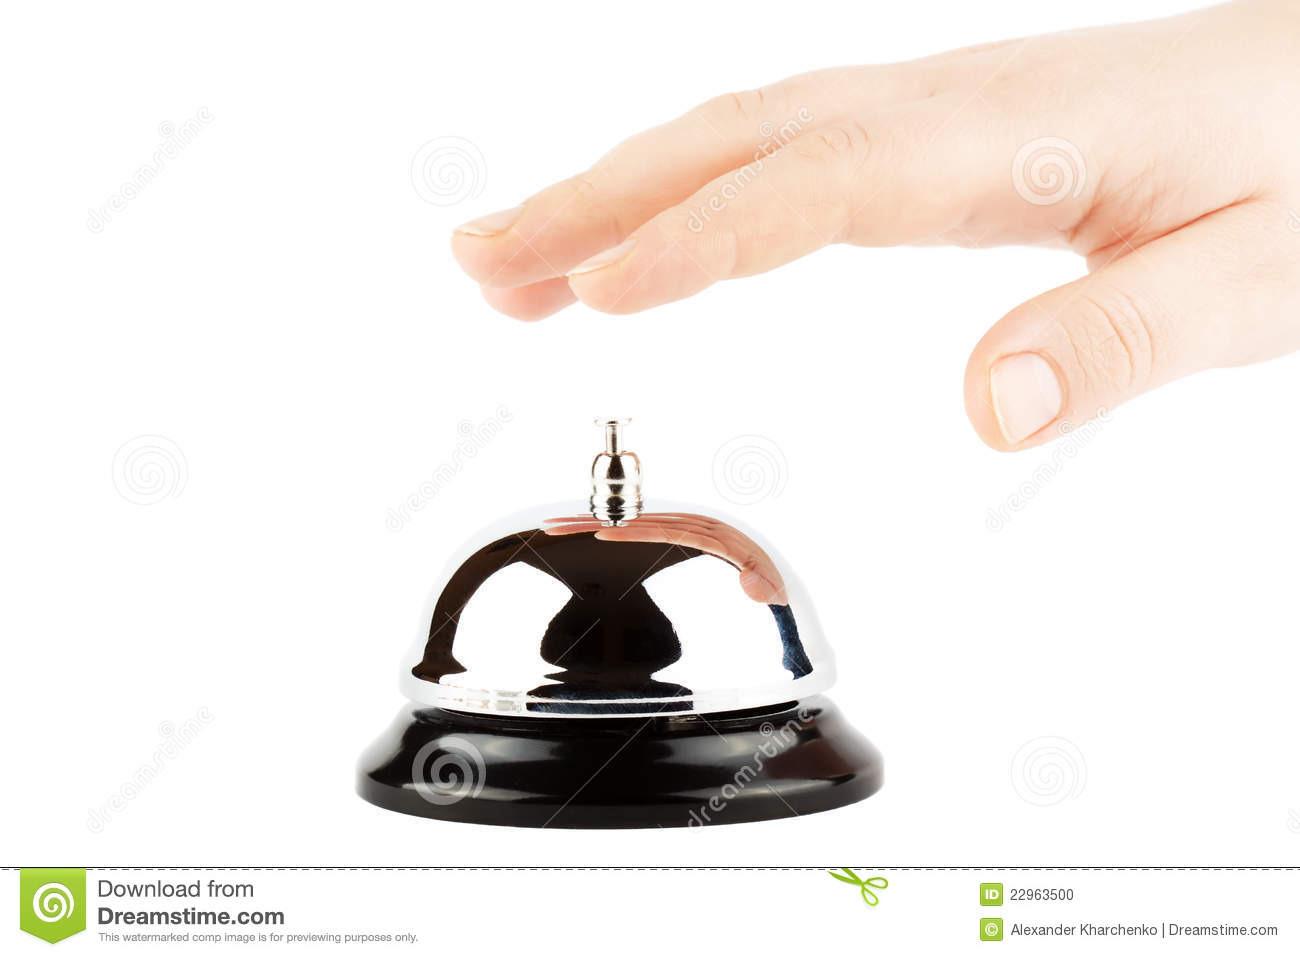 Ringing A Bell For Service With Hand Stock Photo   Image  22963500